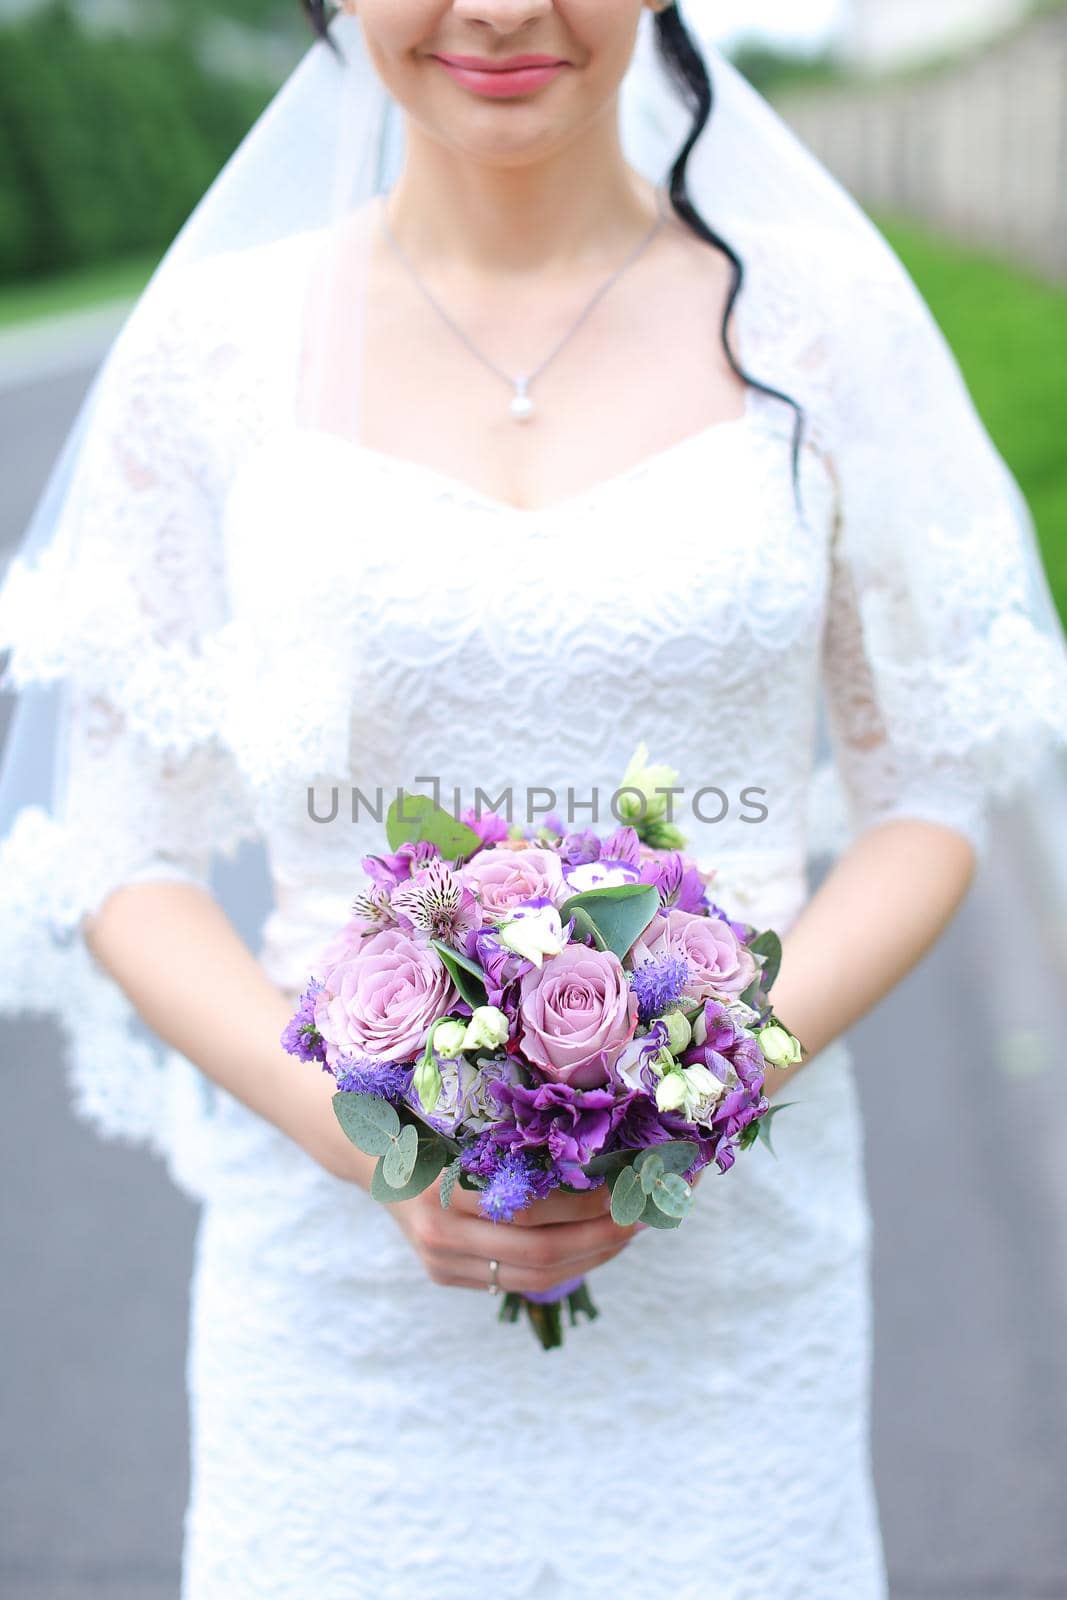 Bride keeping violet bouquet of flowers. Concept of wedding and floristic art.